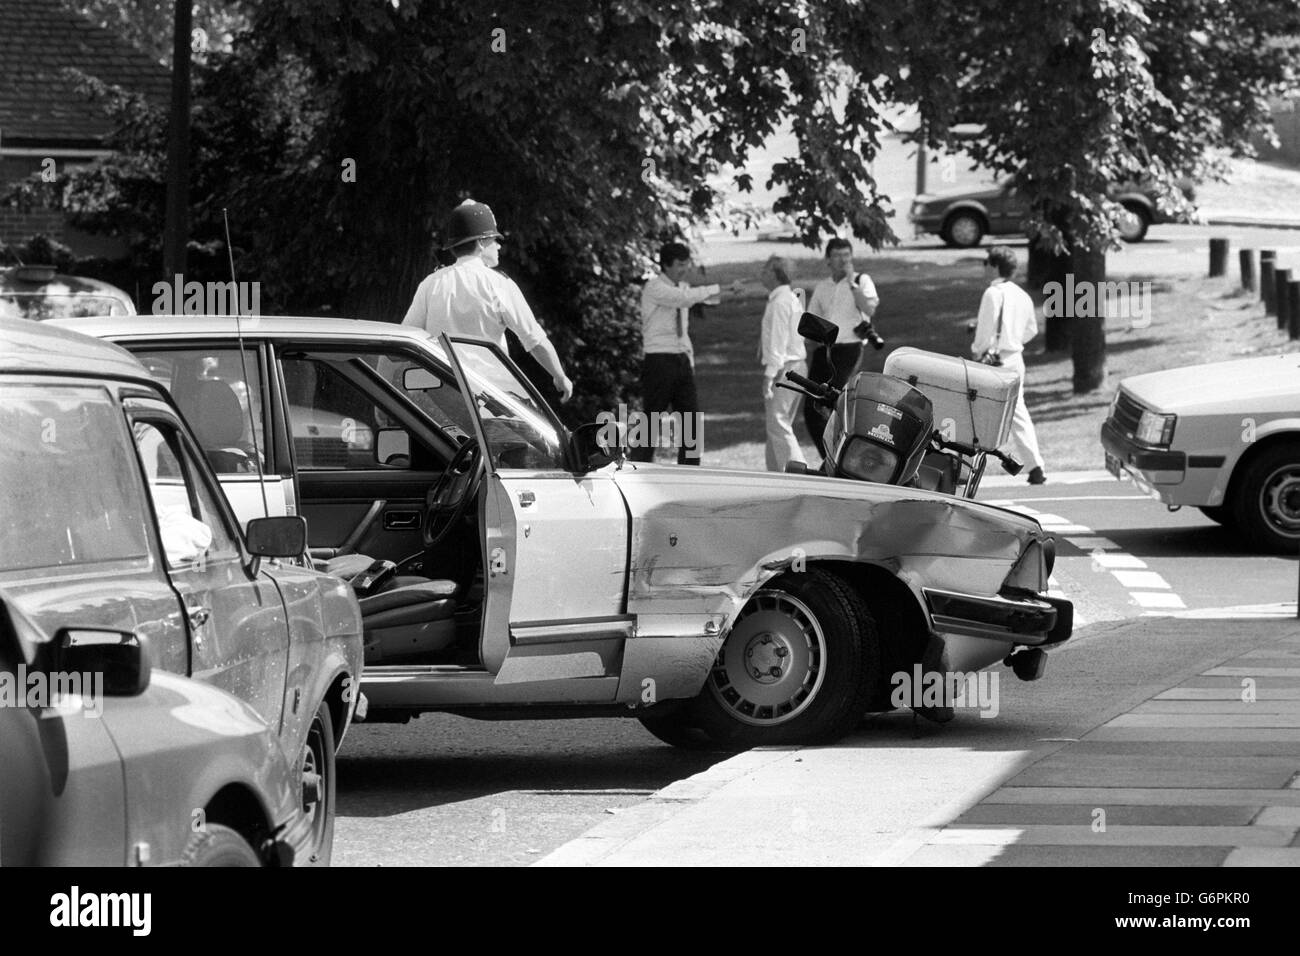 The wreckage of Ford Granada used in a getaway attempt, after an armed robbery went wrong in Shooter's Hill, London. Police shot dead two men involved in the incident. Stock Photo